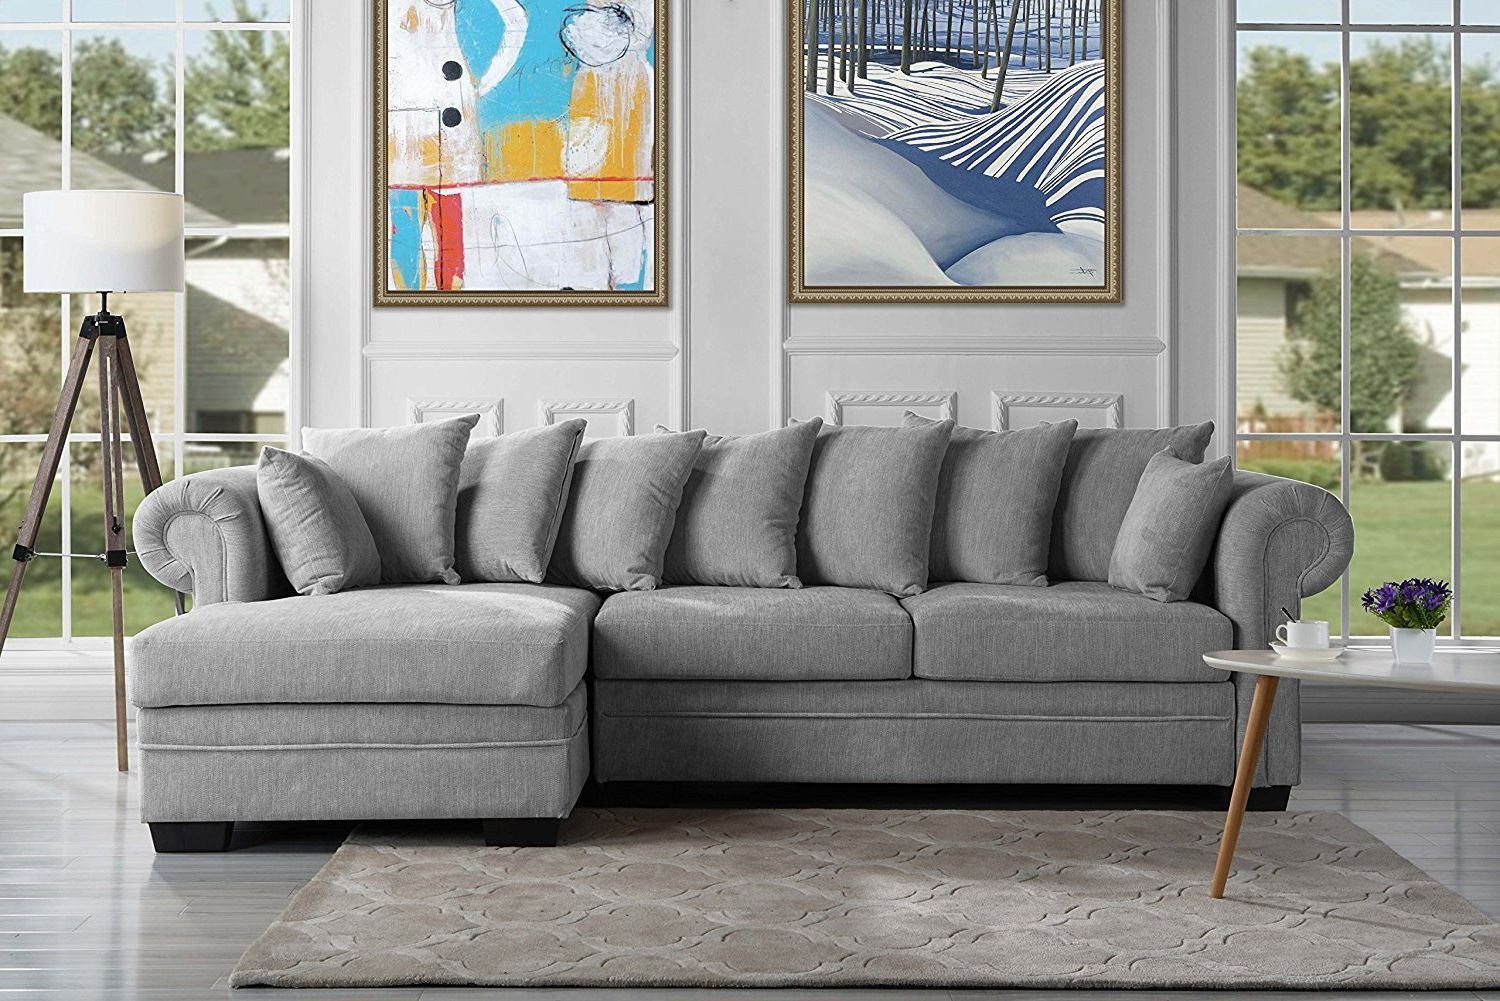 Modern Large Sectional Sofa, L Shape Couch W/ Extra Wide Chaise, Light Pertaining To Sofas In Light Gray (View 16 of 20)